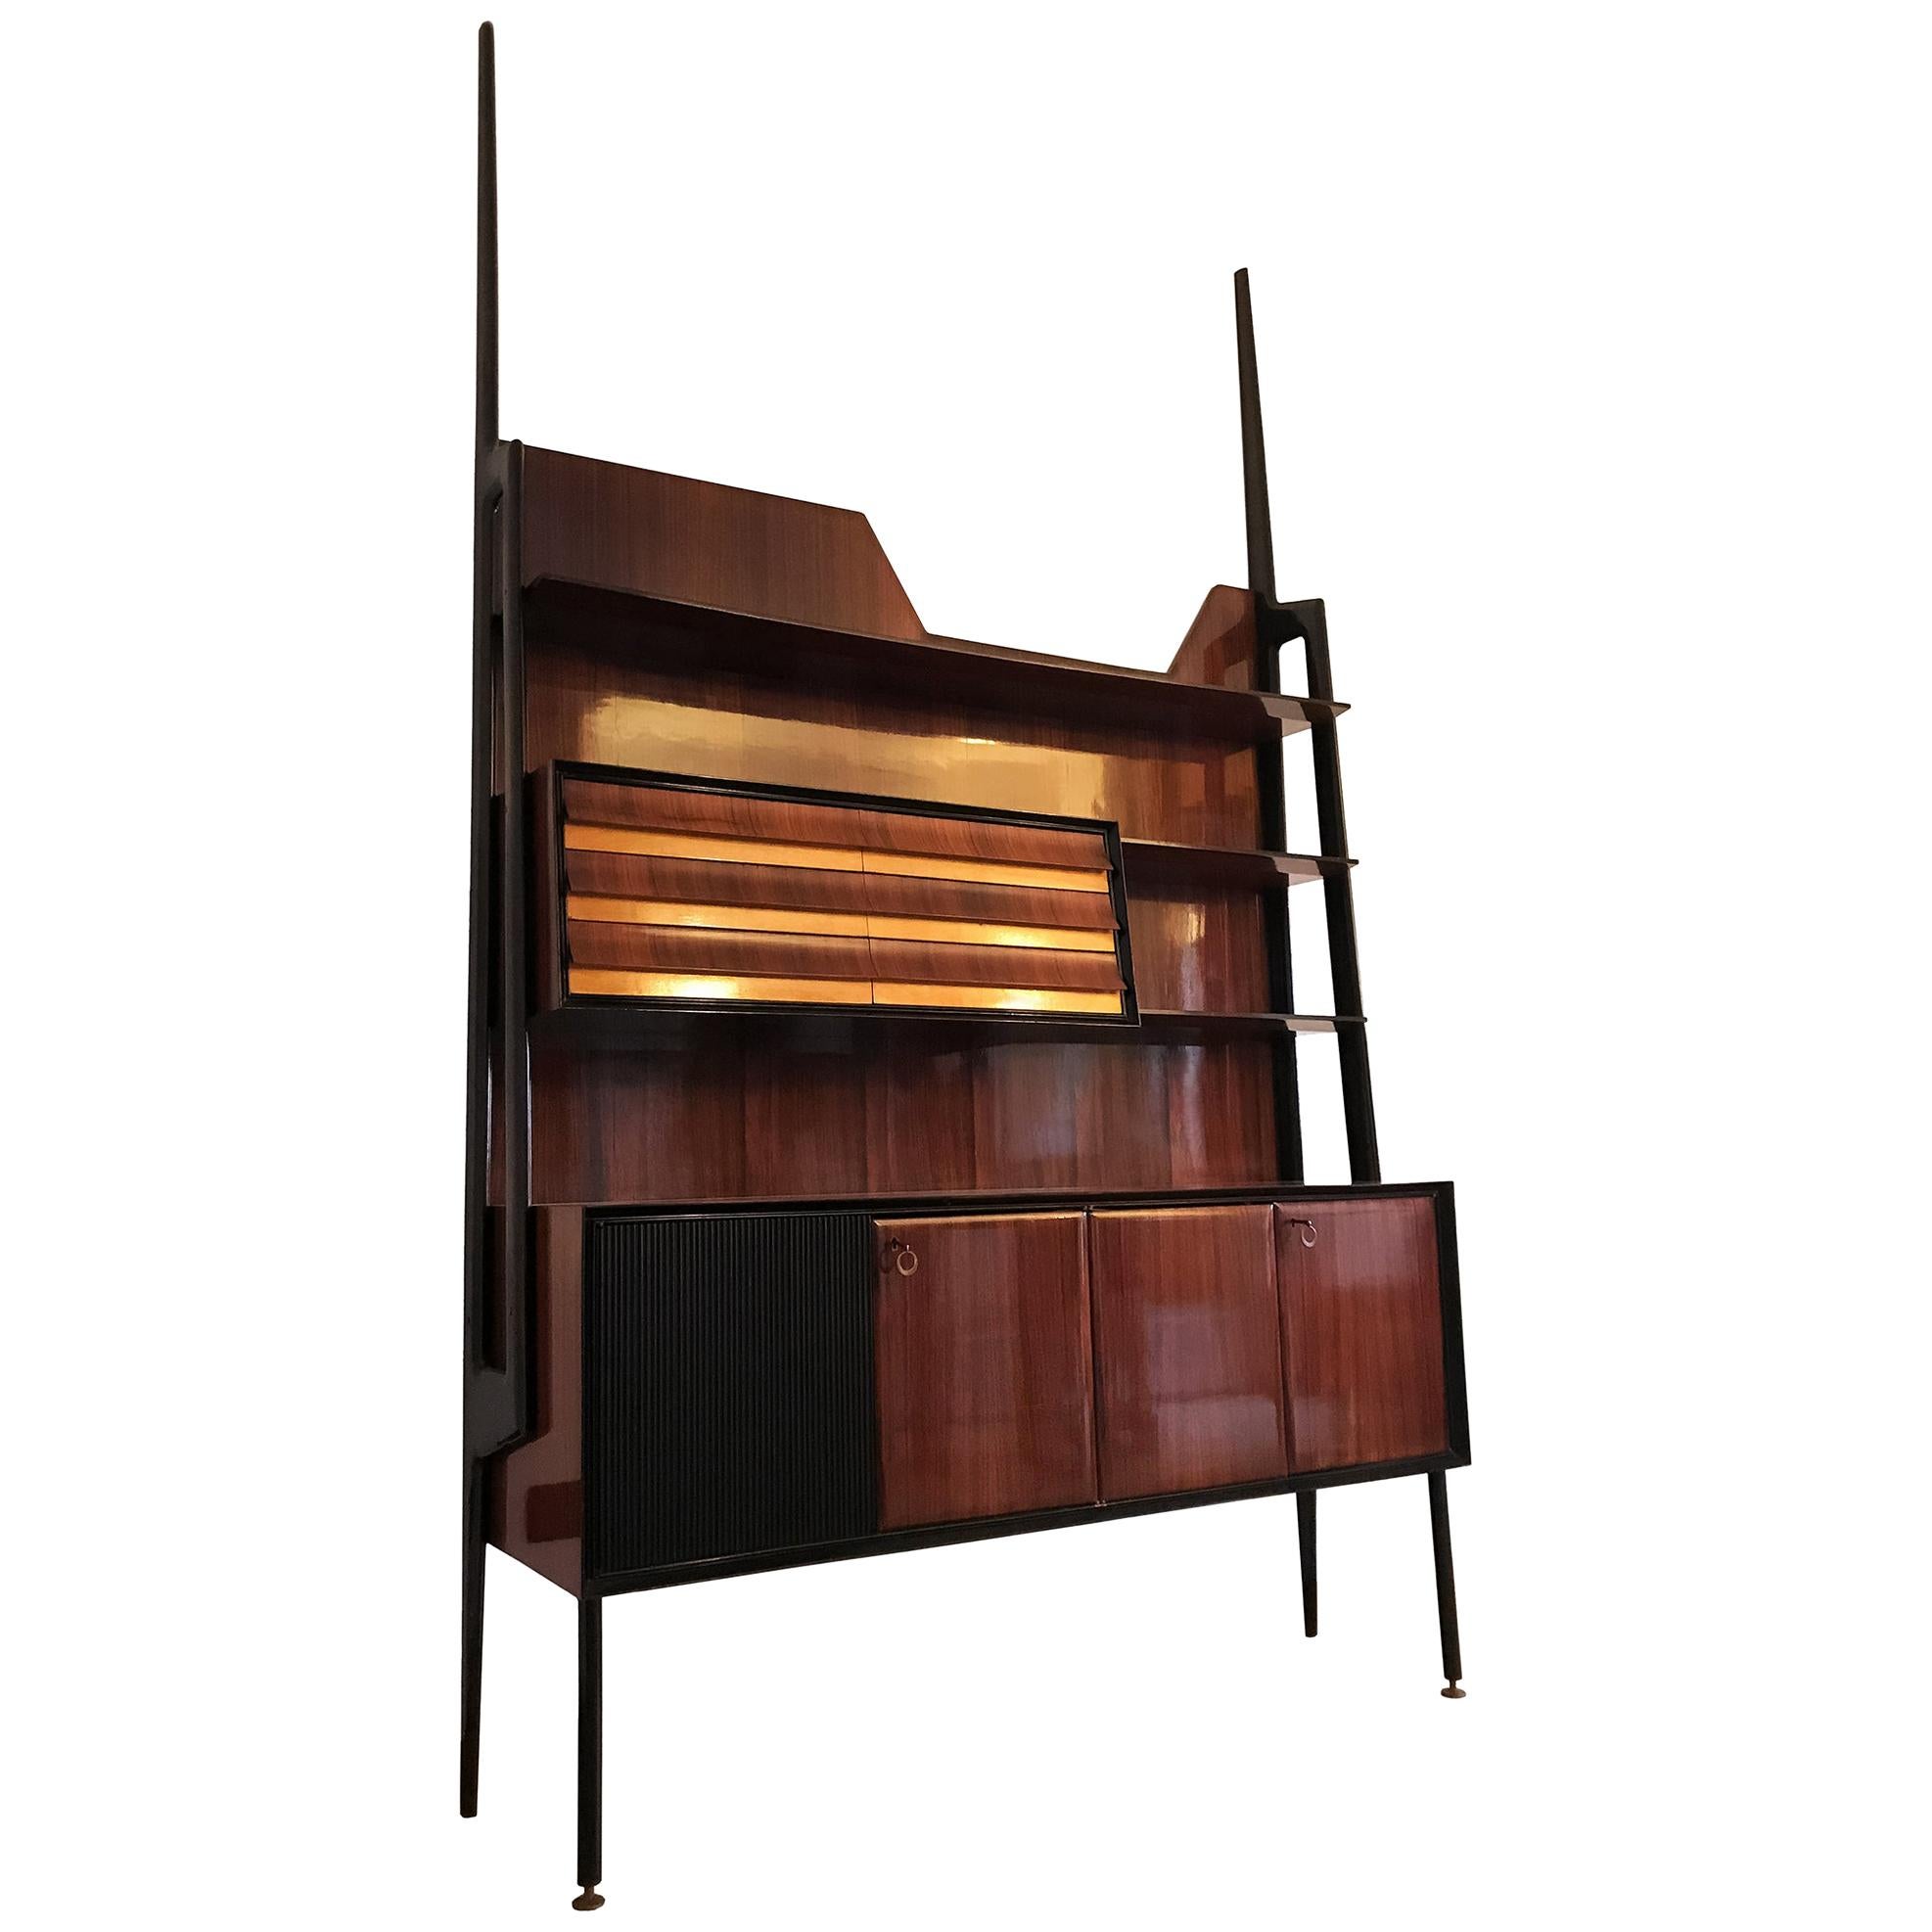 Italian Midcentury Self-Standing Wall Unit or Bookcase by Vittorio Dassi, 1950s